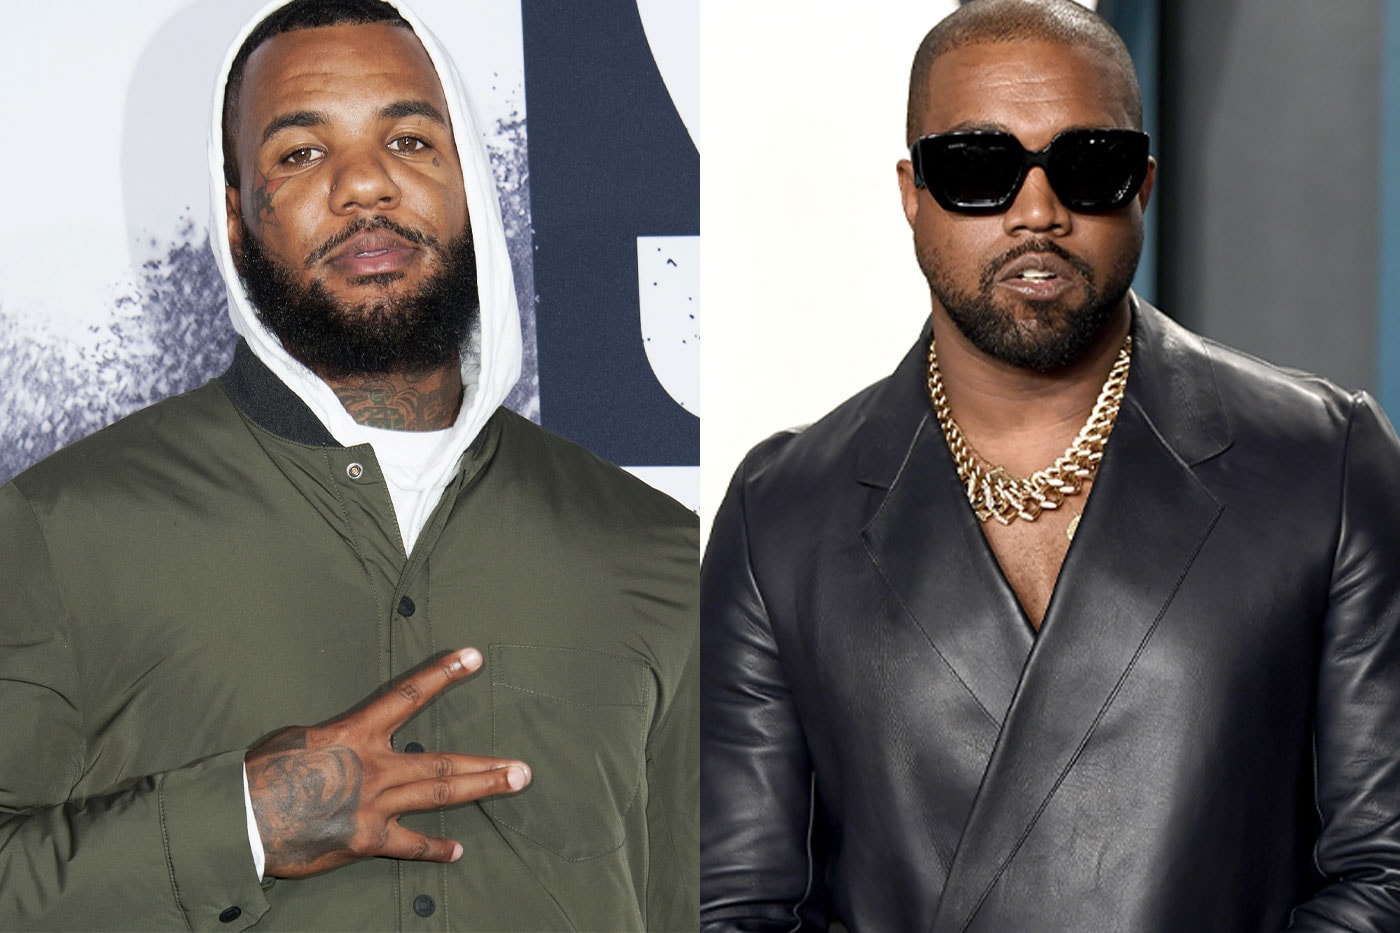 Kanye West and The Game Reportedly Link Up for Upcoming Project eazy-e hit-boy rapper hip hop jay-z travis scott drake 